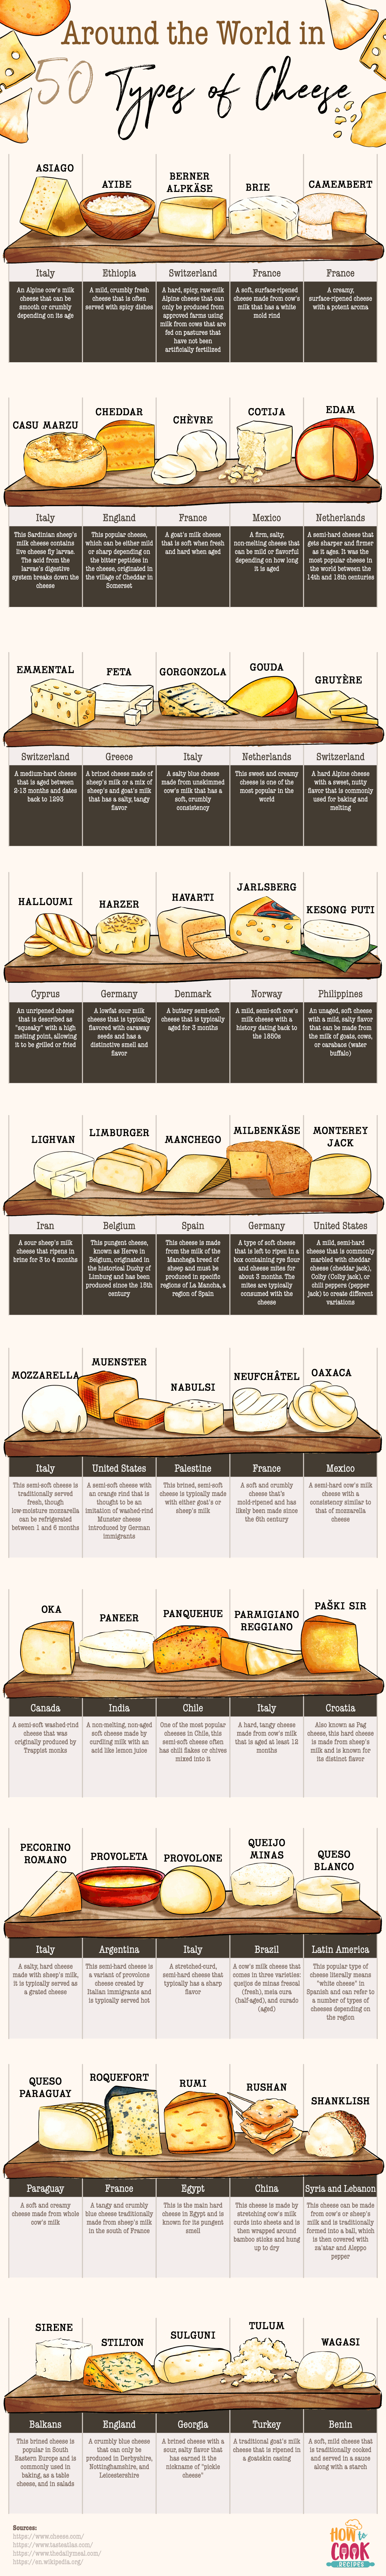 Around the World in 50 Types of Cheese